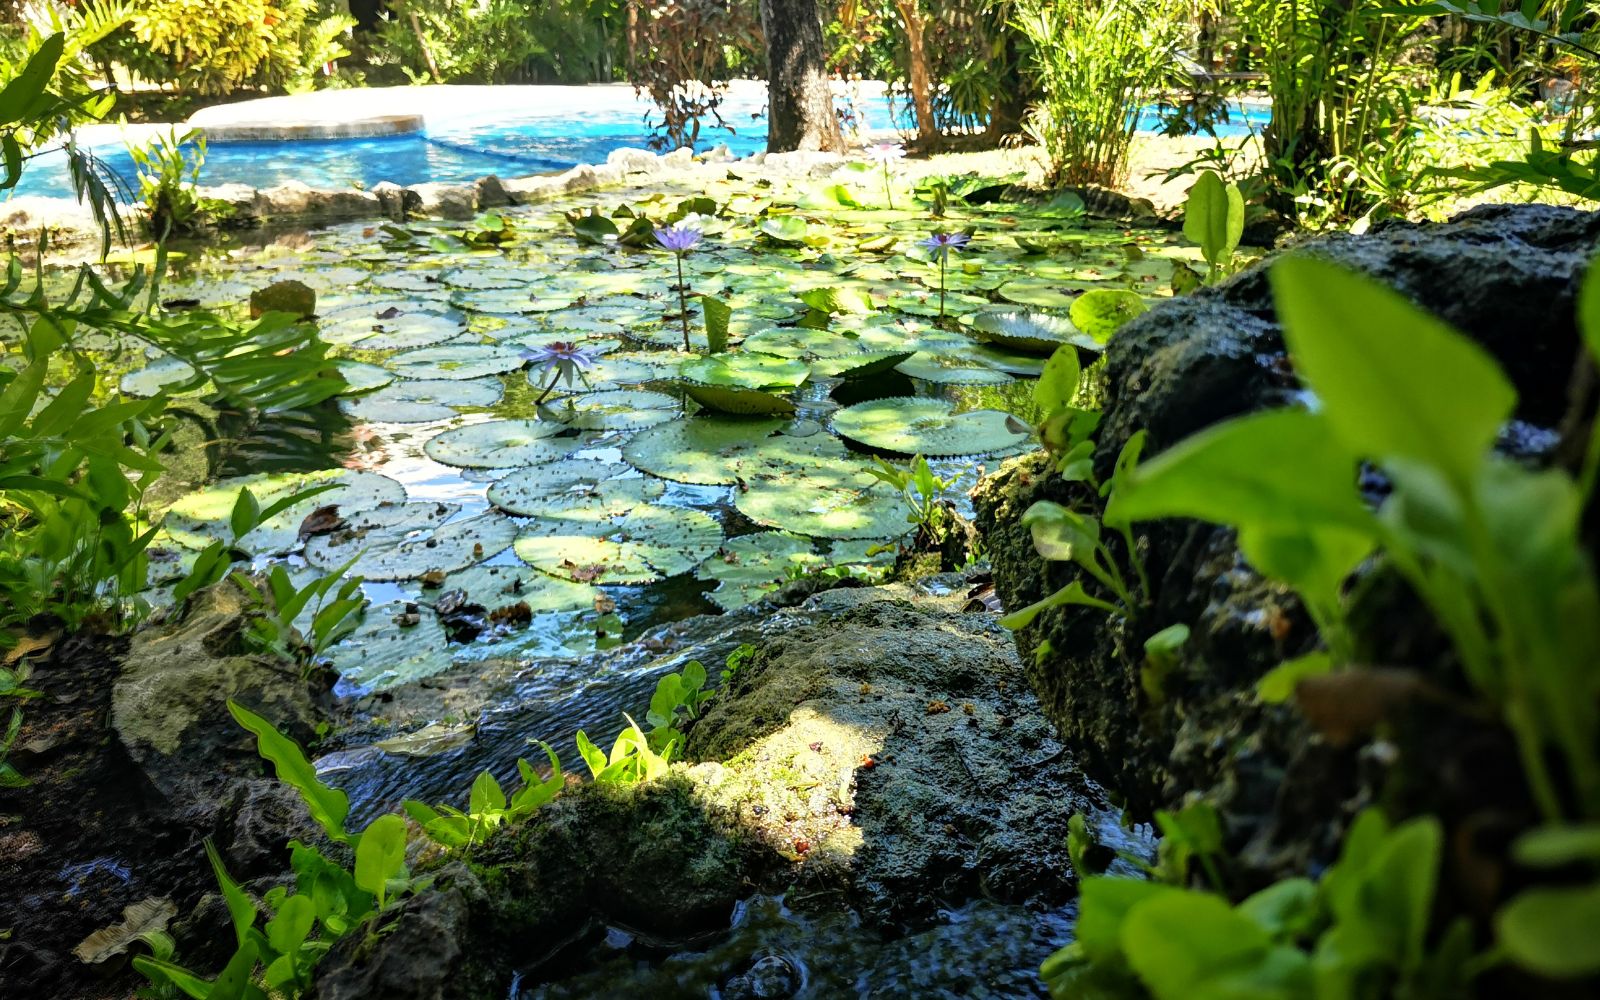 970 m2 lot, in gated community with private cenote, for sale Playa del Carmen.